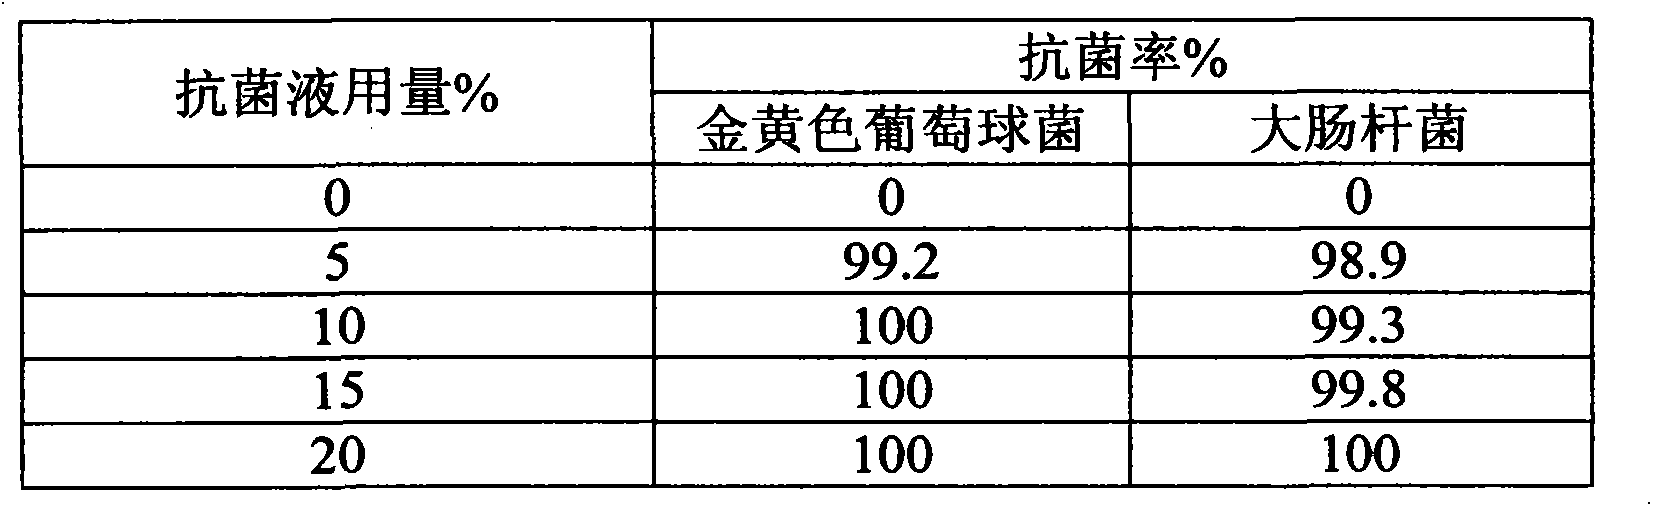 Anti-bacterial finishing agent for textiles